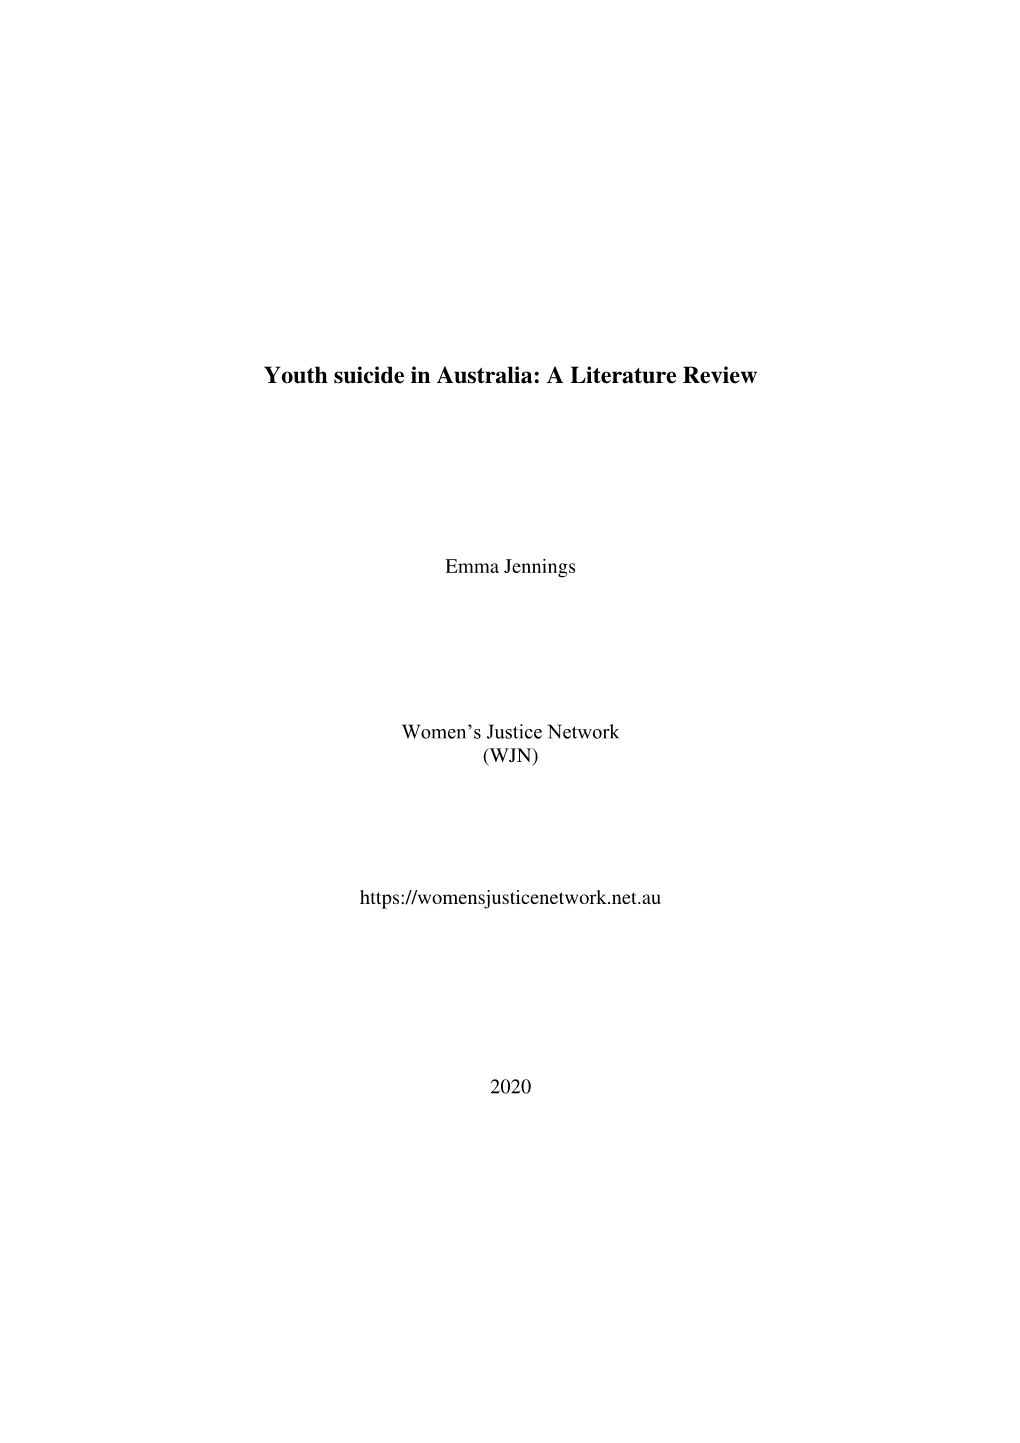 Youth Suicide in Australia: a Literature Review